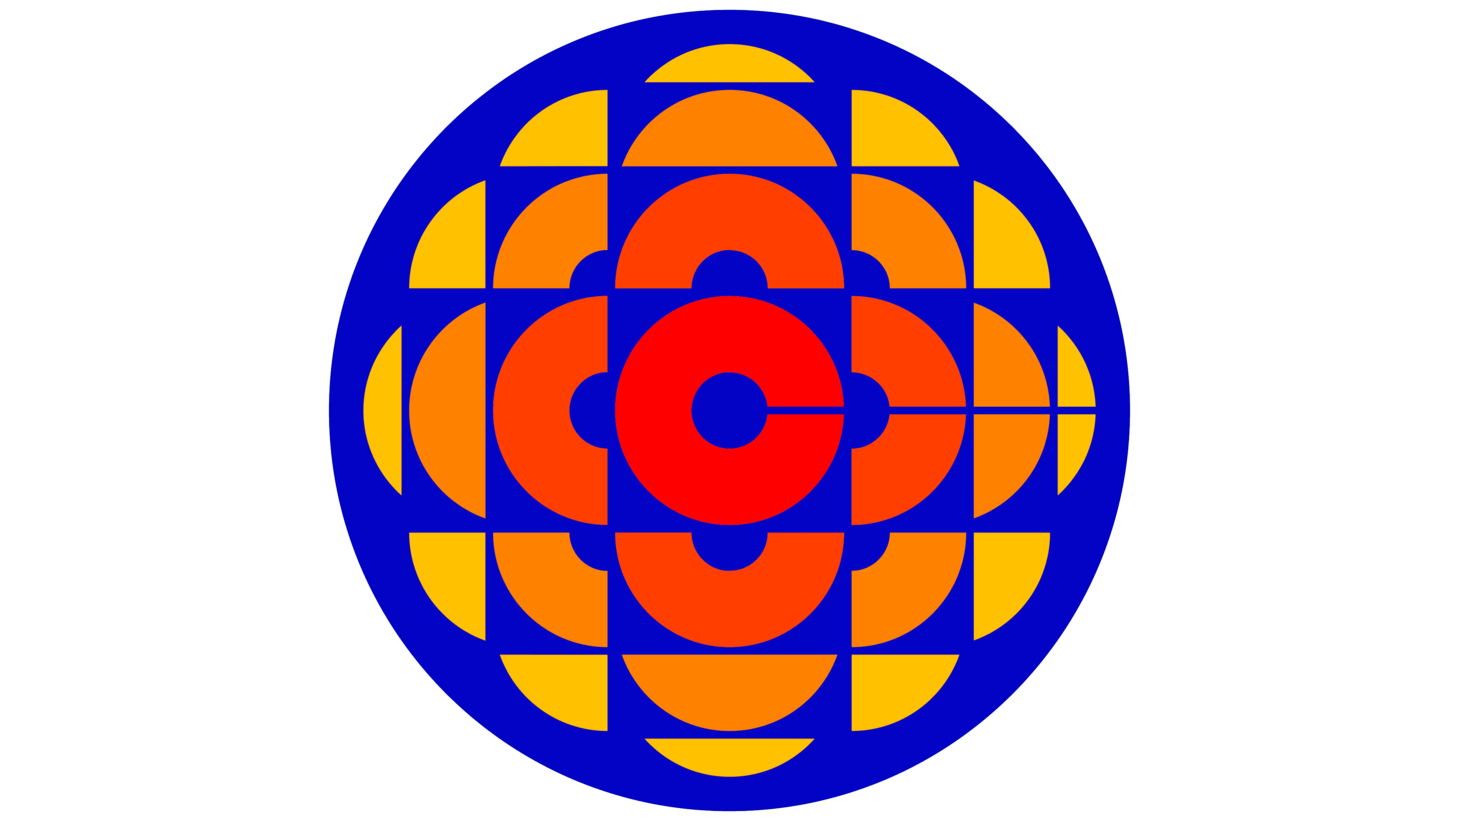 Canadian broadcasting corporation sign 1974 1985